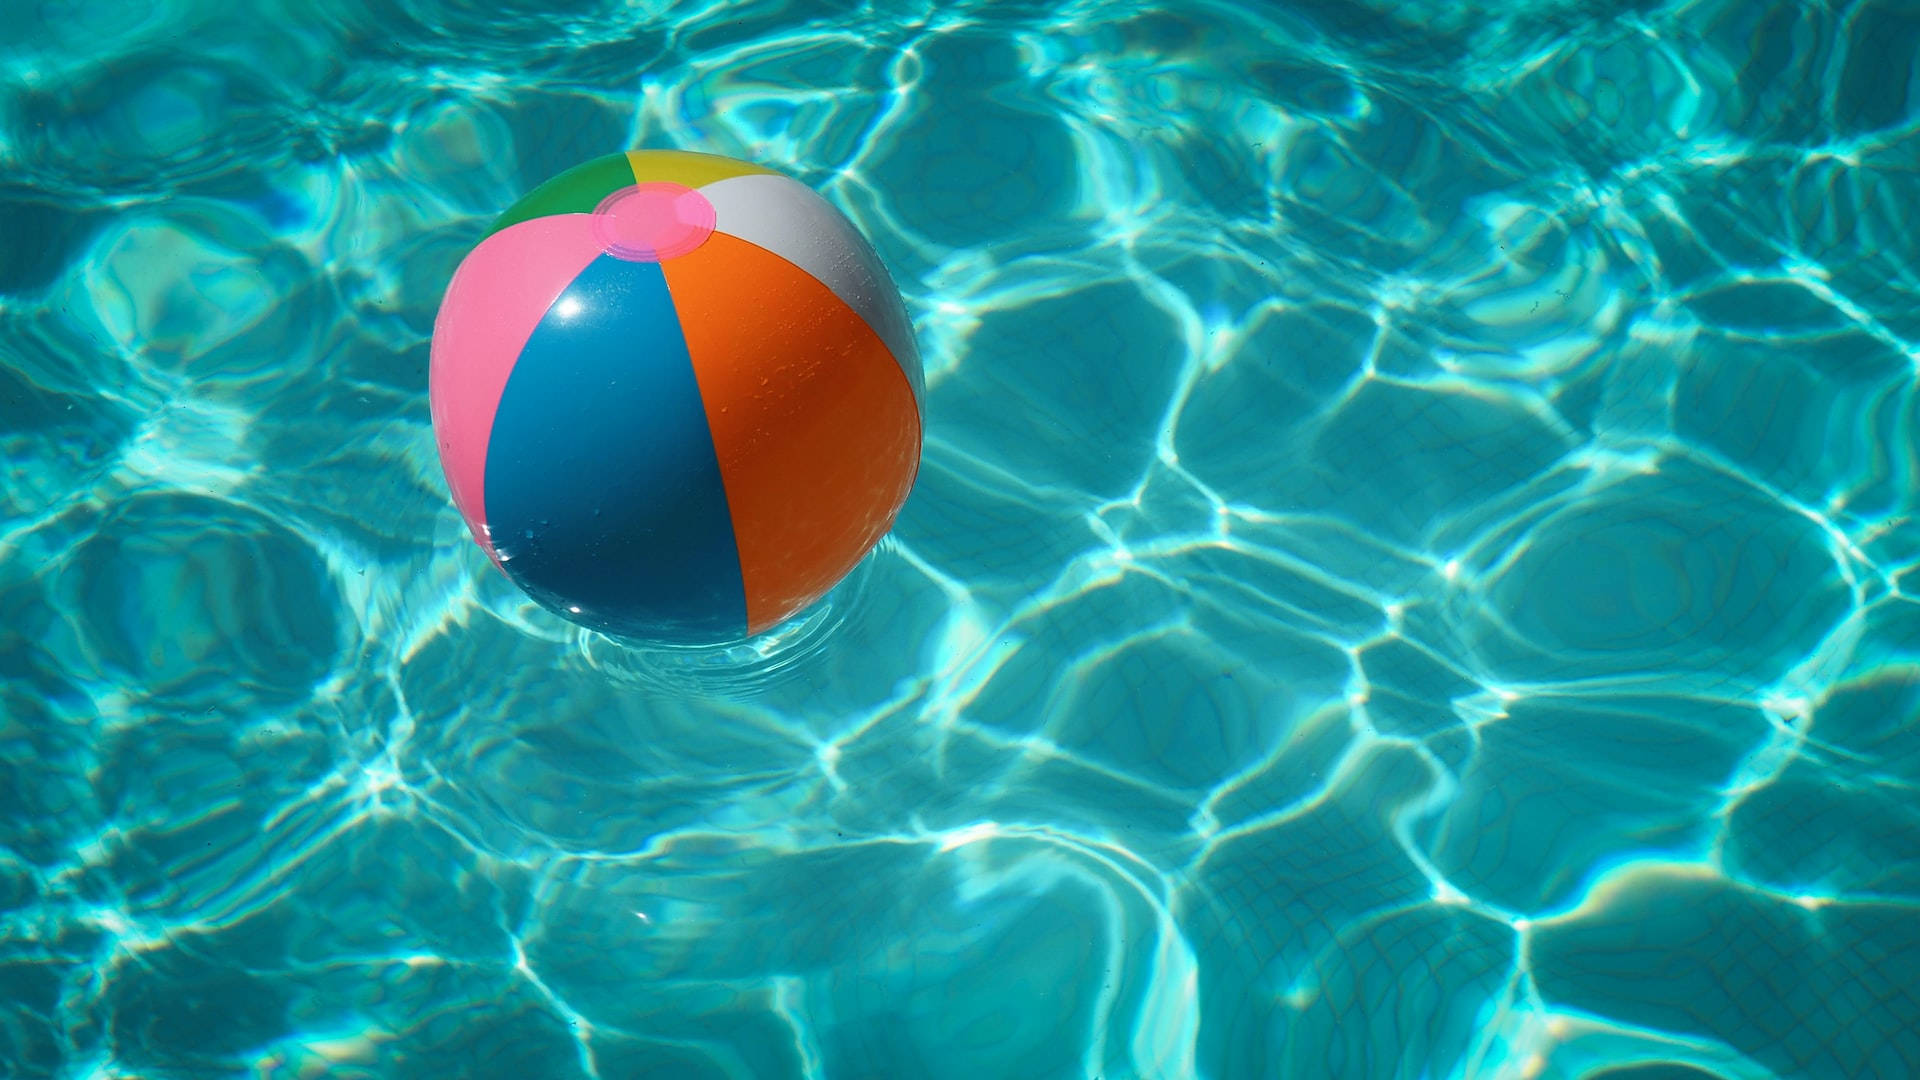 Beach Ball And Moving Water Wallpaper